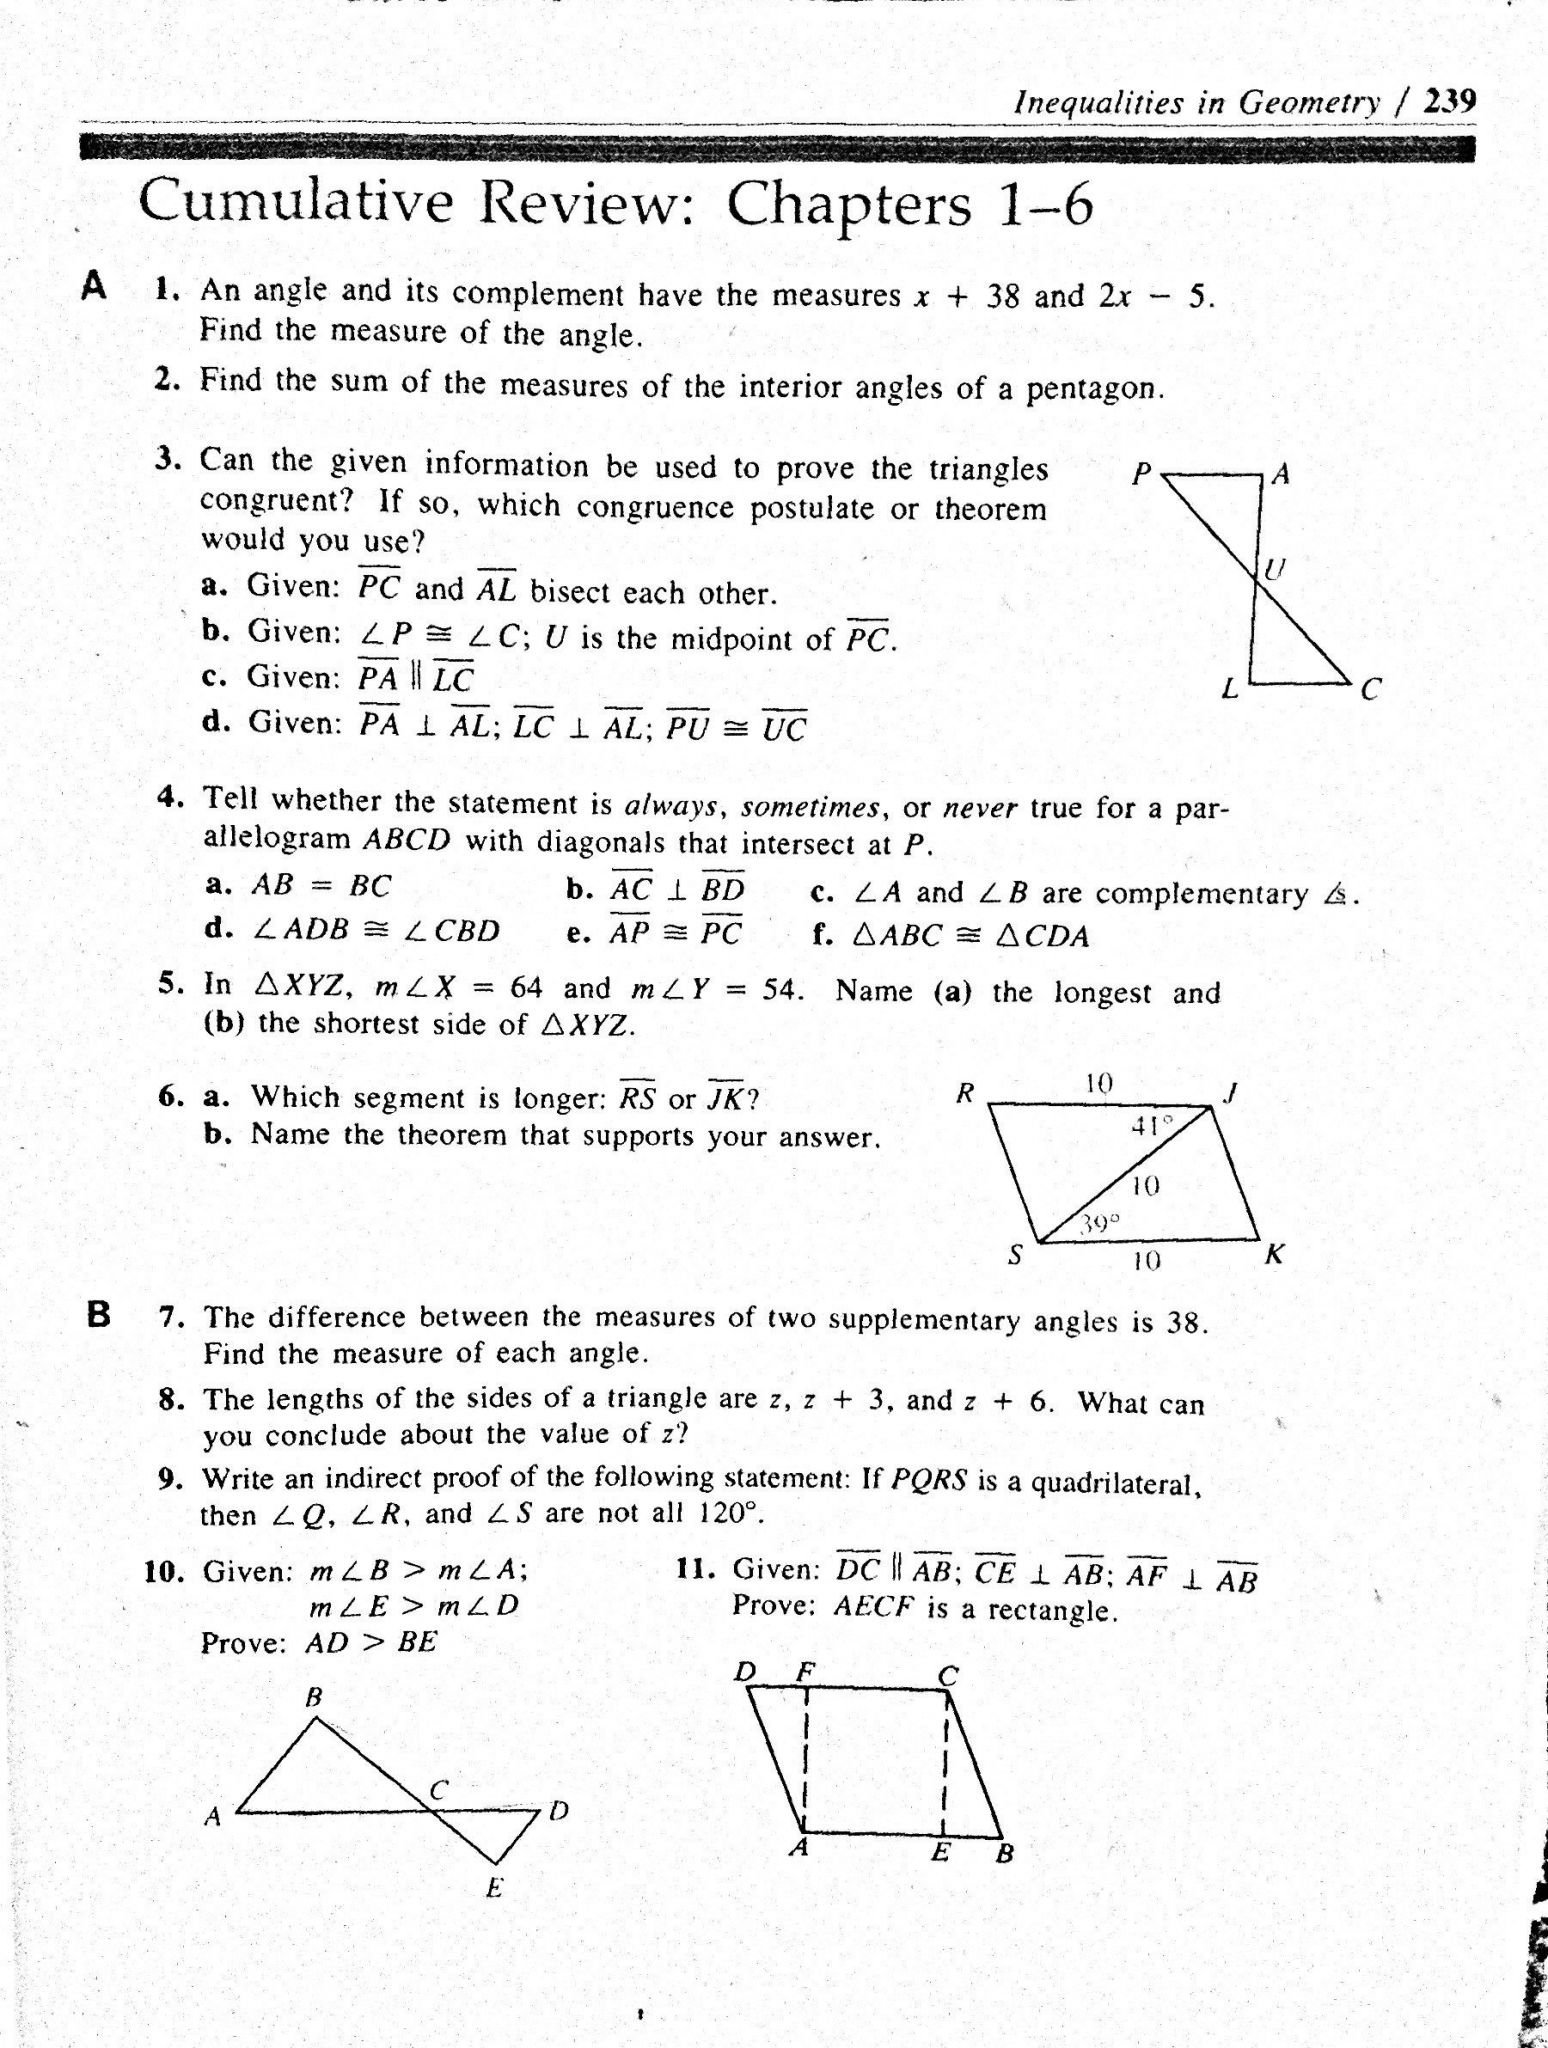 Worksheet 24 Biconditional Statements Answers  Briefencounters And Worksheet 2 4 Biconditional Statements Answers